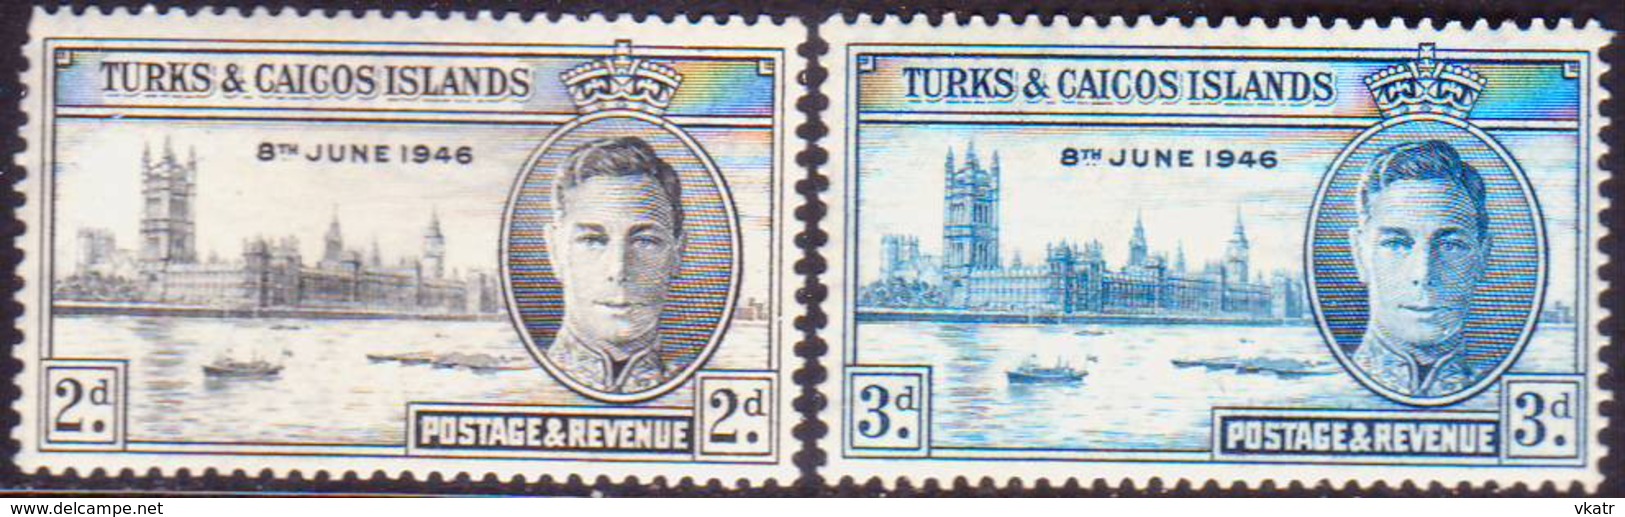 TURKS AND CAICOS ISLANDS 1946 SG #206-07 Compl.set MLH Victory - Turks And Caicos